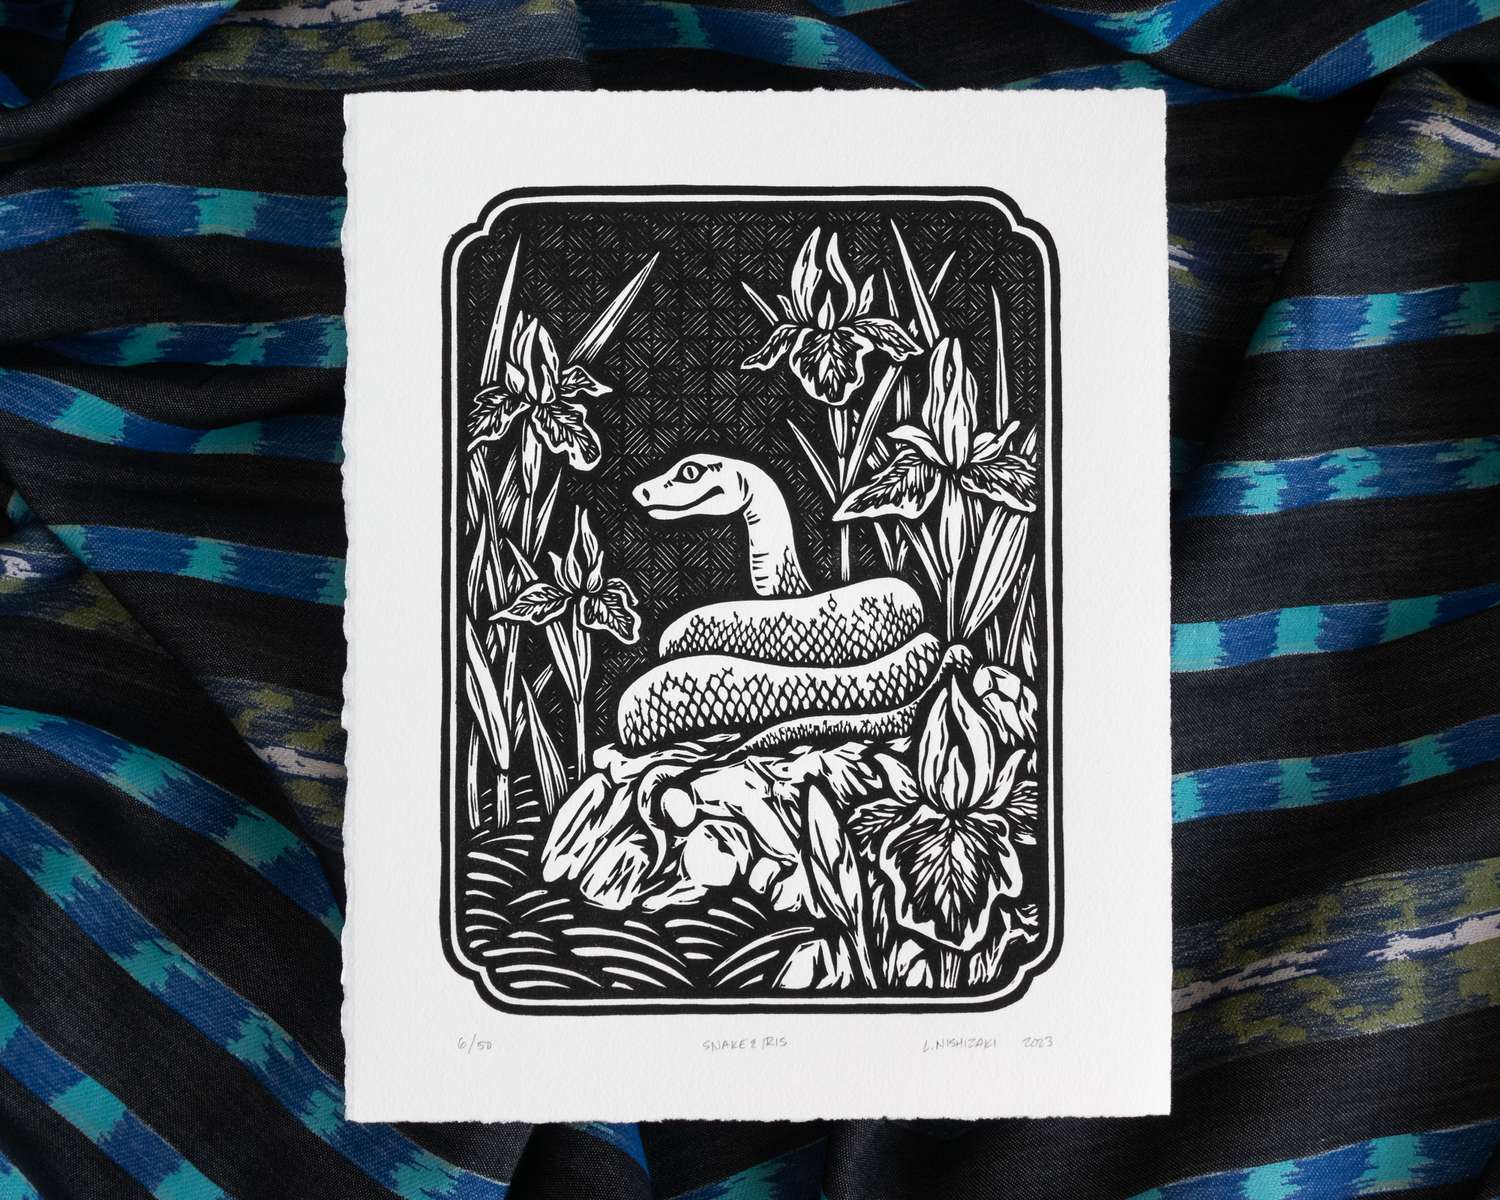 A black and white blockprint of a snake sitting coiled up on a rock, surrounded by irises in bloom. The edges of the paper are deckled and hand-torn, and the print sits on top of a backdrop of rumpled striped fabric.